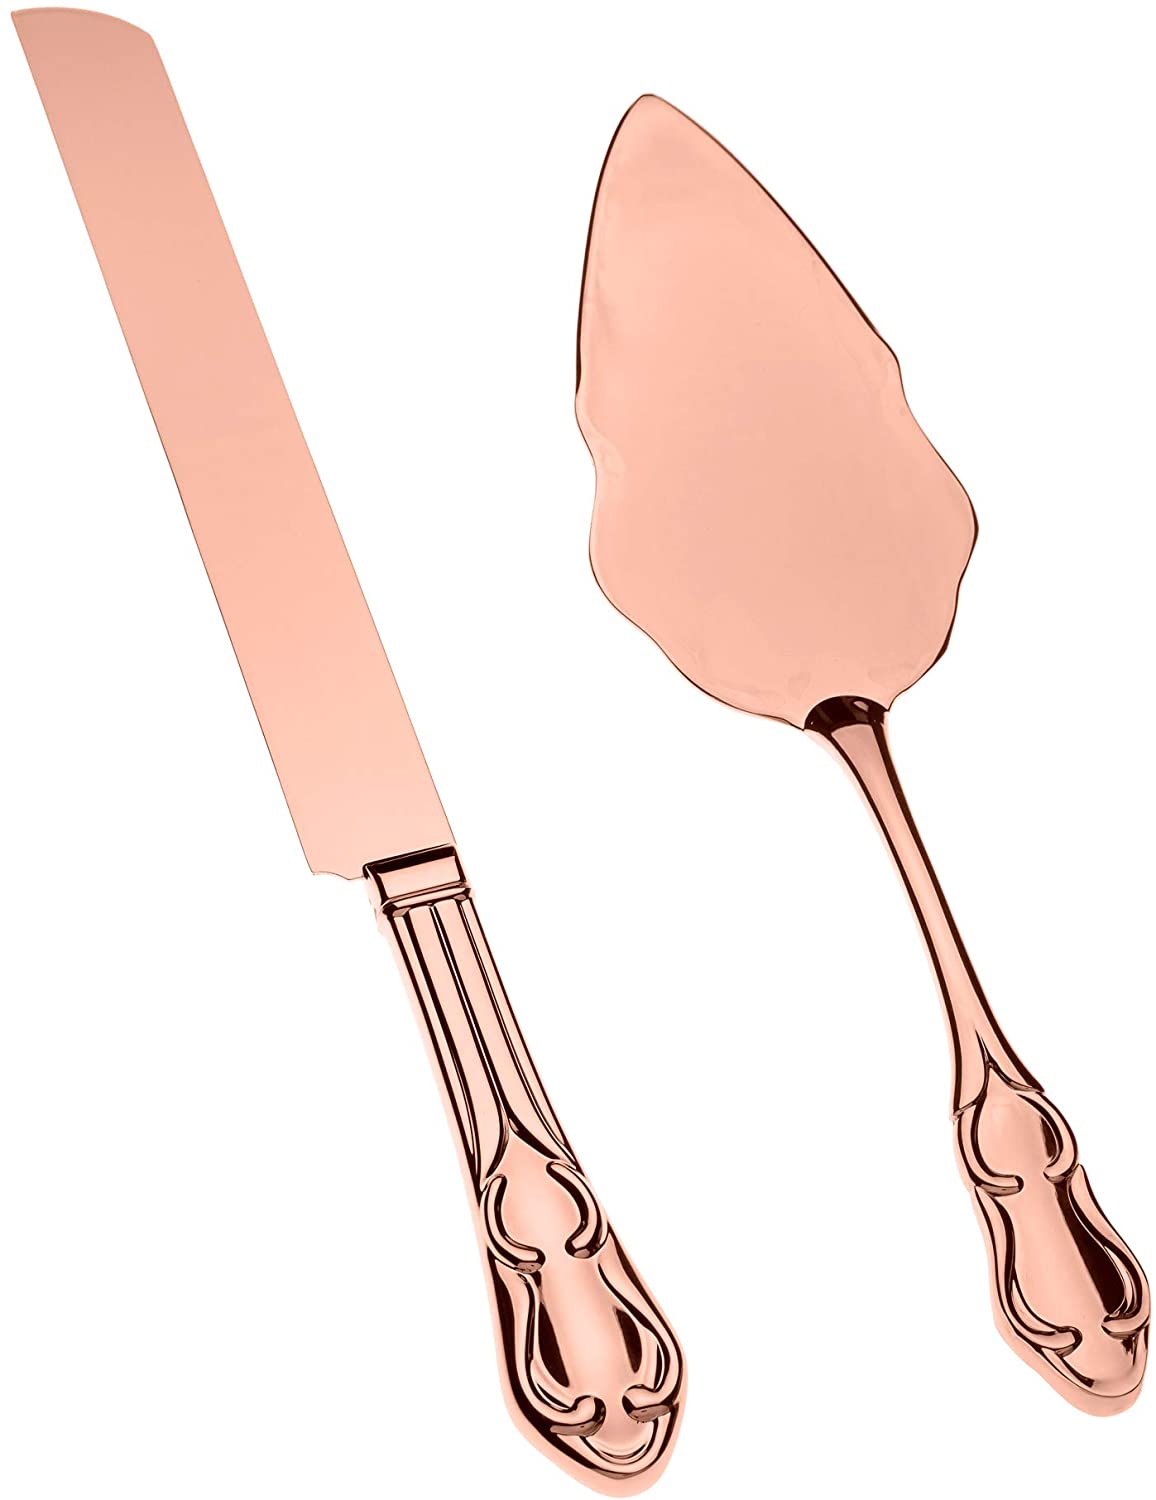 12 Personalized Wedding Cake Knife and Server Set Free Engraving, Heart  Shape Handle, Color (Rose Gold)